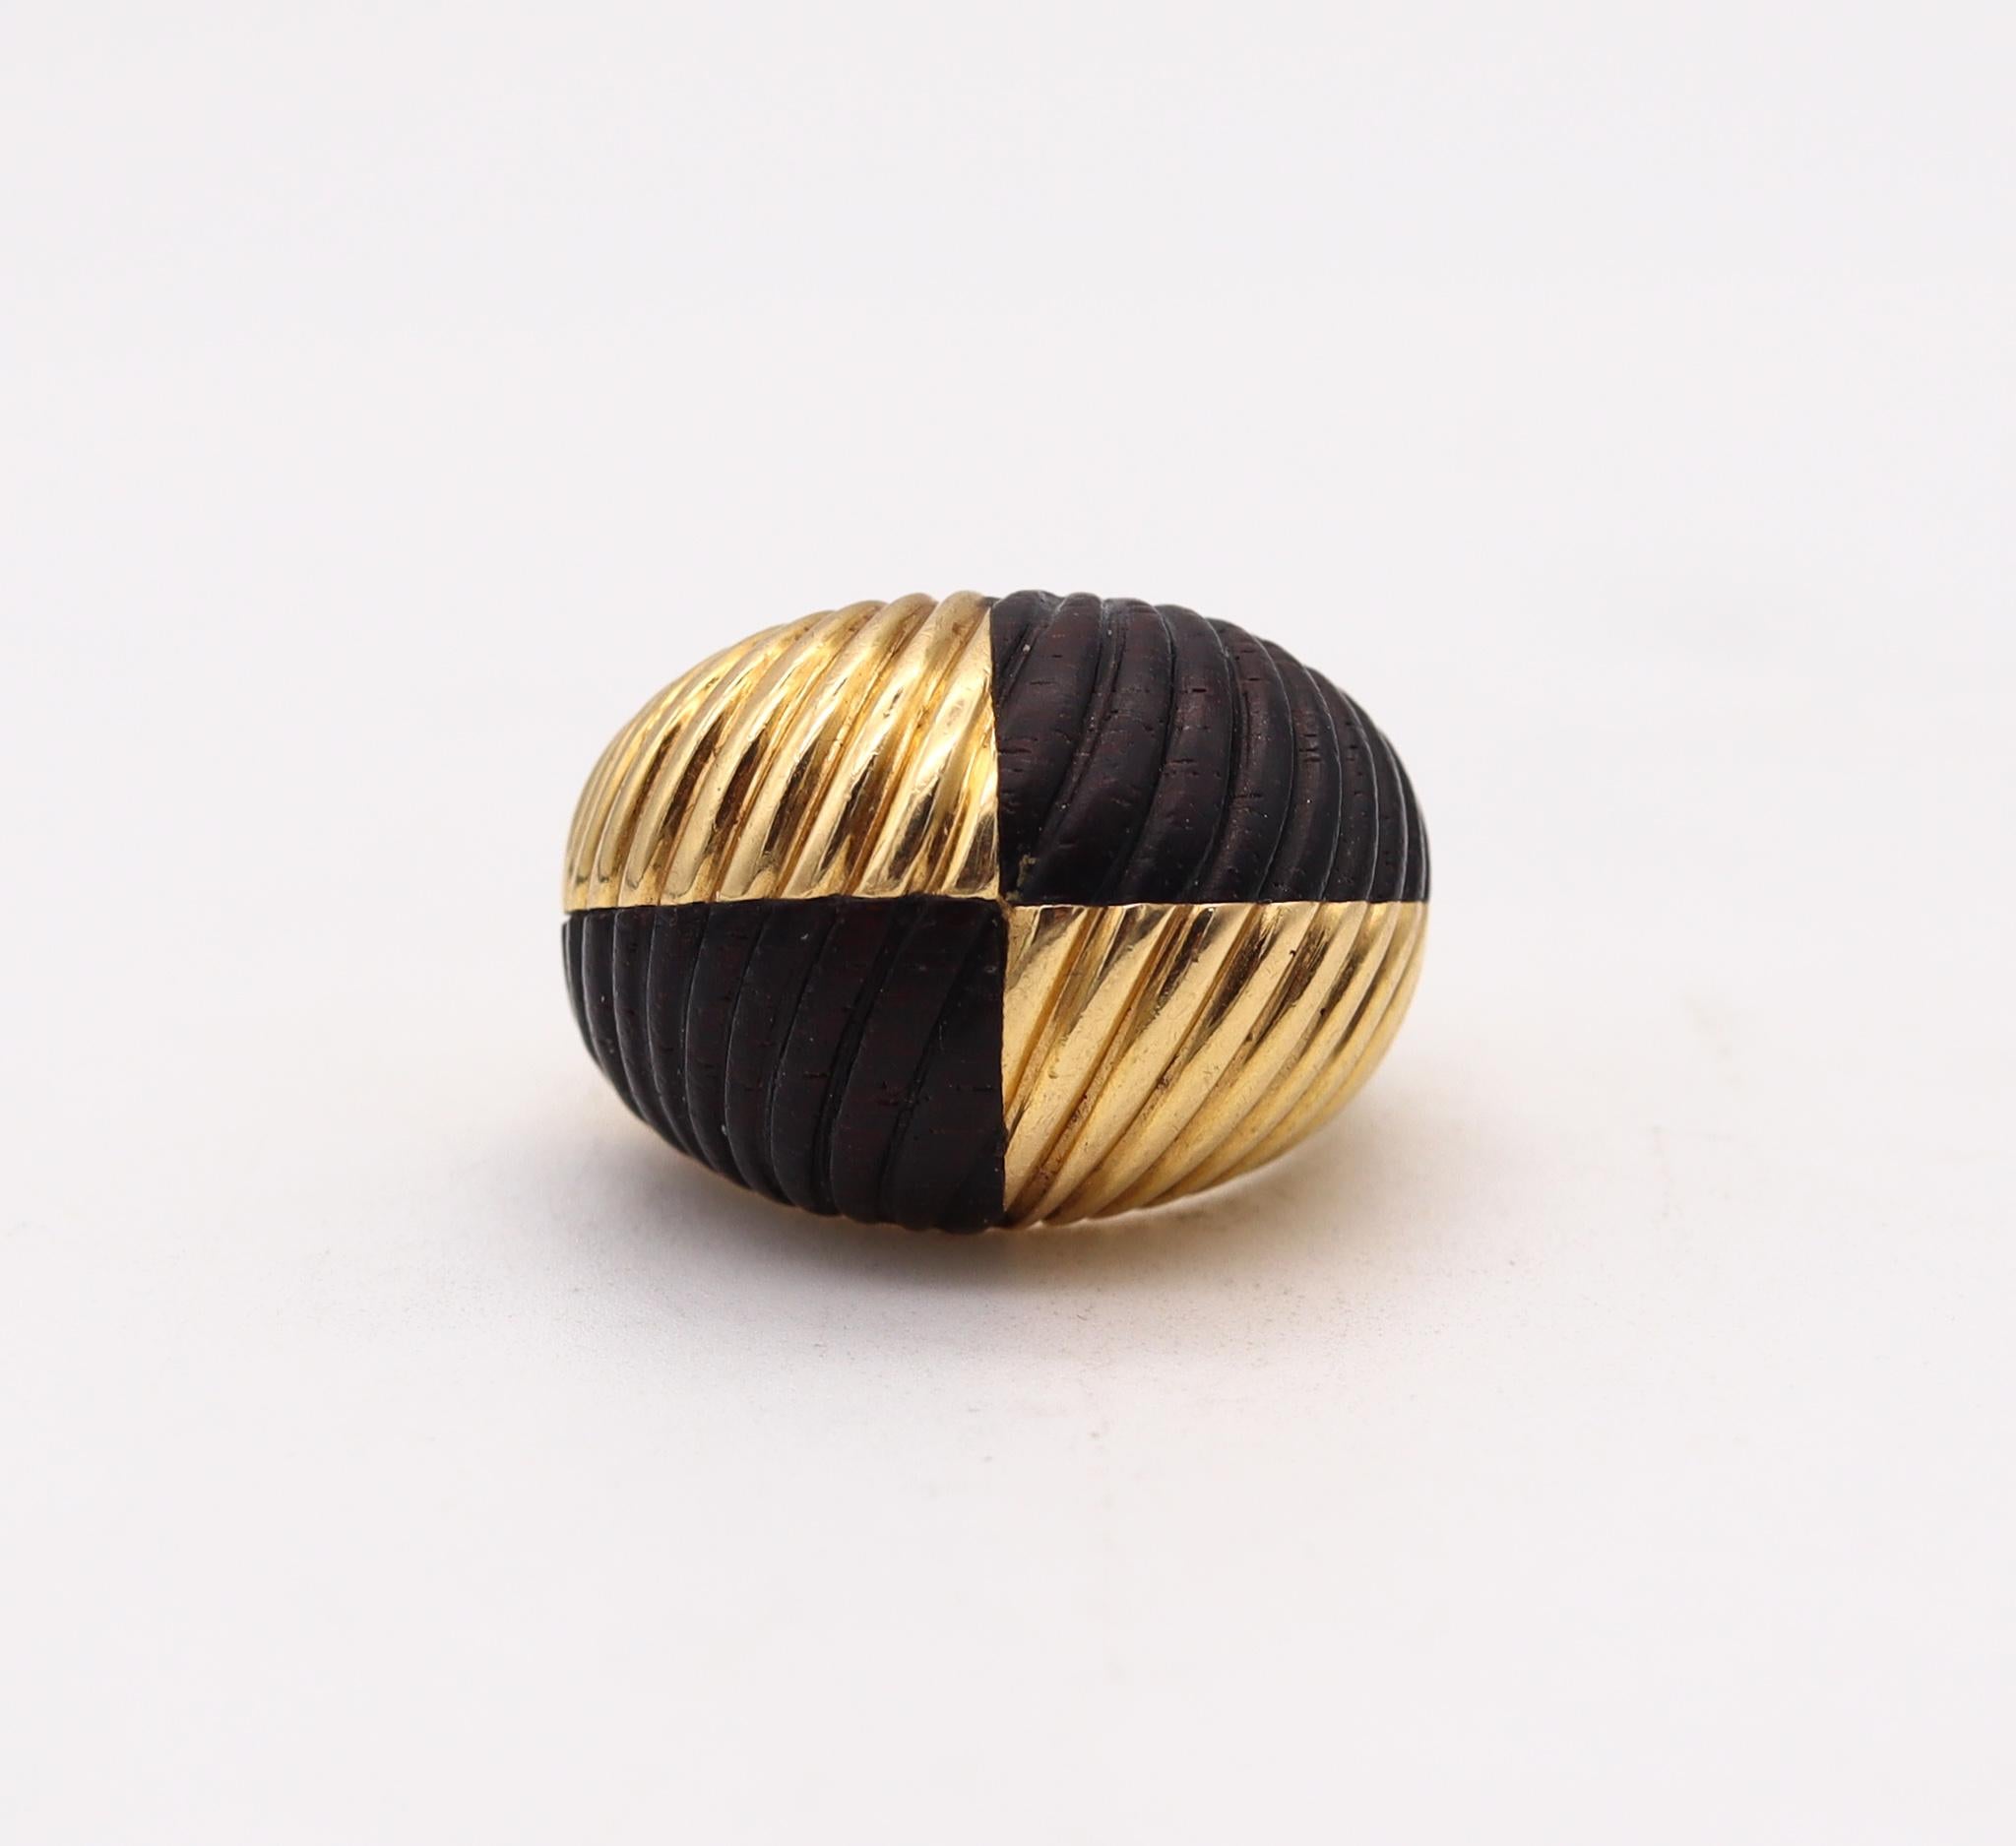 Modernist Van Cleef & Arpels 1970 Paris Bombe Wood Cocktail Ring in 18Kt Yellow Gold For Sale